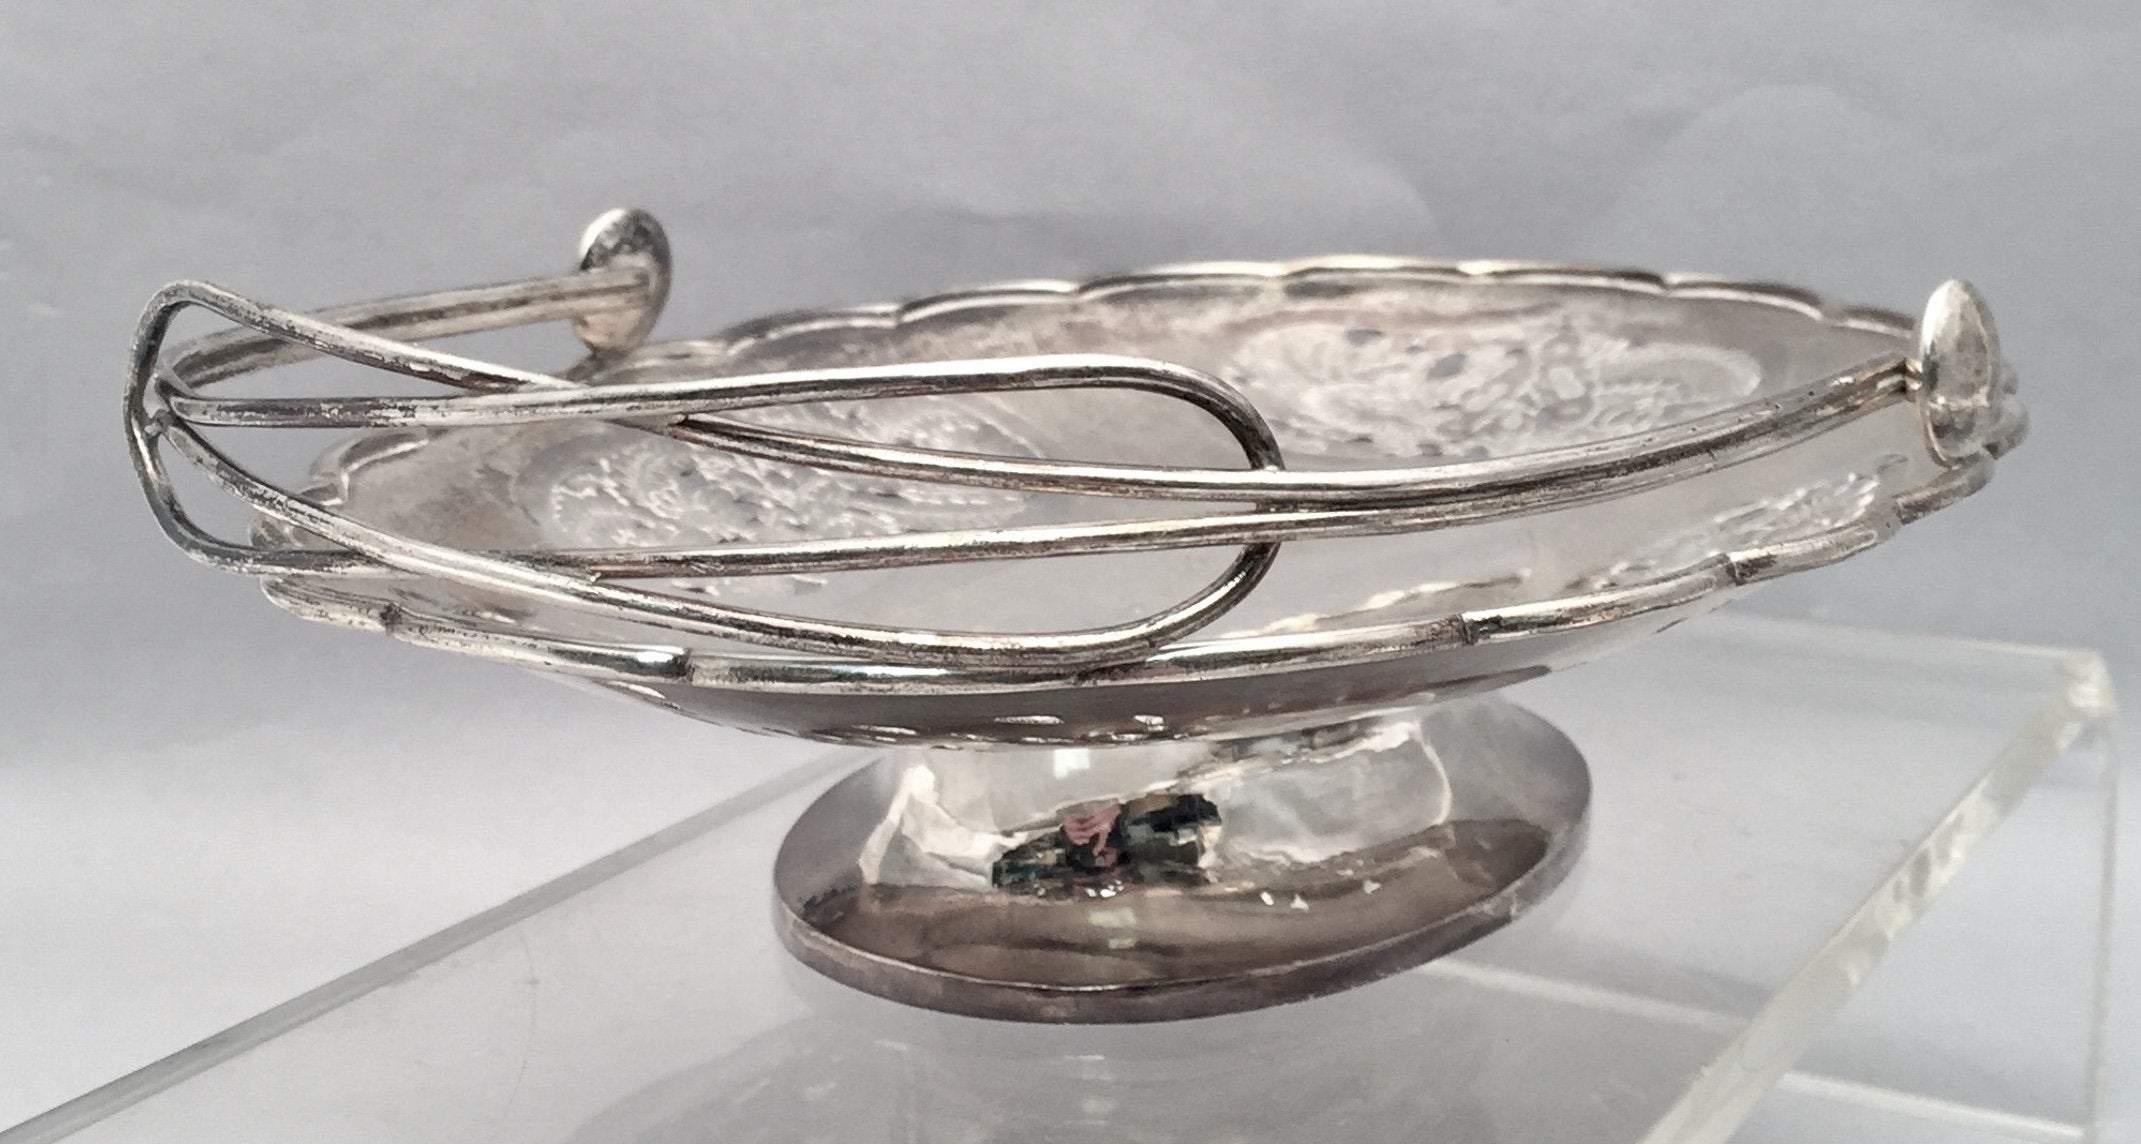 Set of 3 Chinese Silver Centerpiece Bowls with Floral Piercing by Nanking In Good Condition For Sale In New York, NY